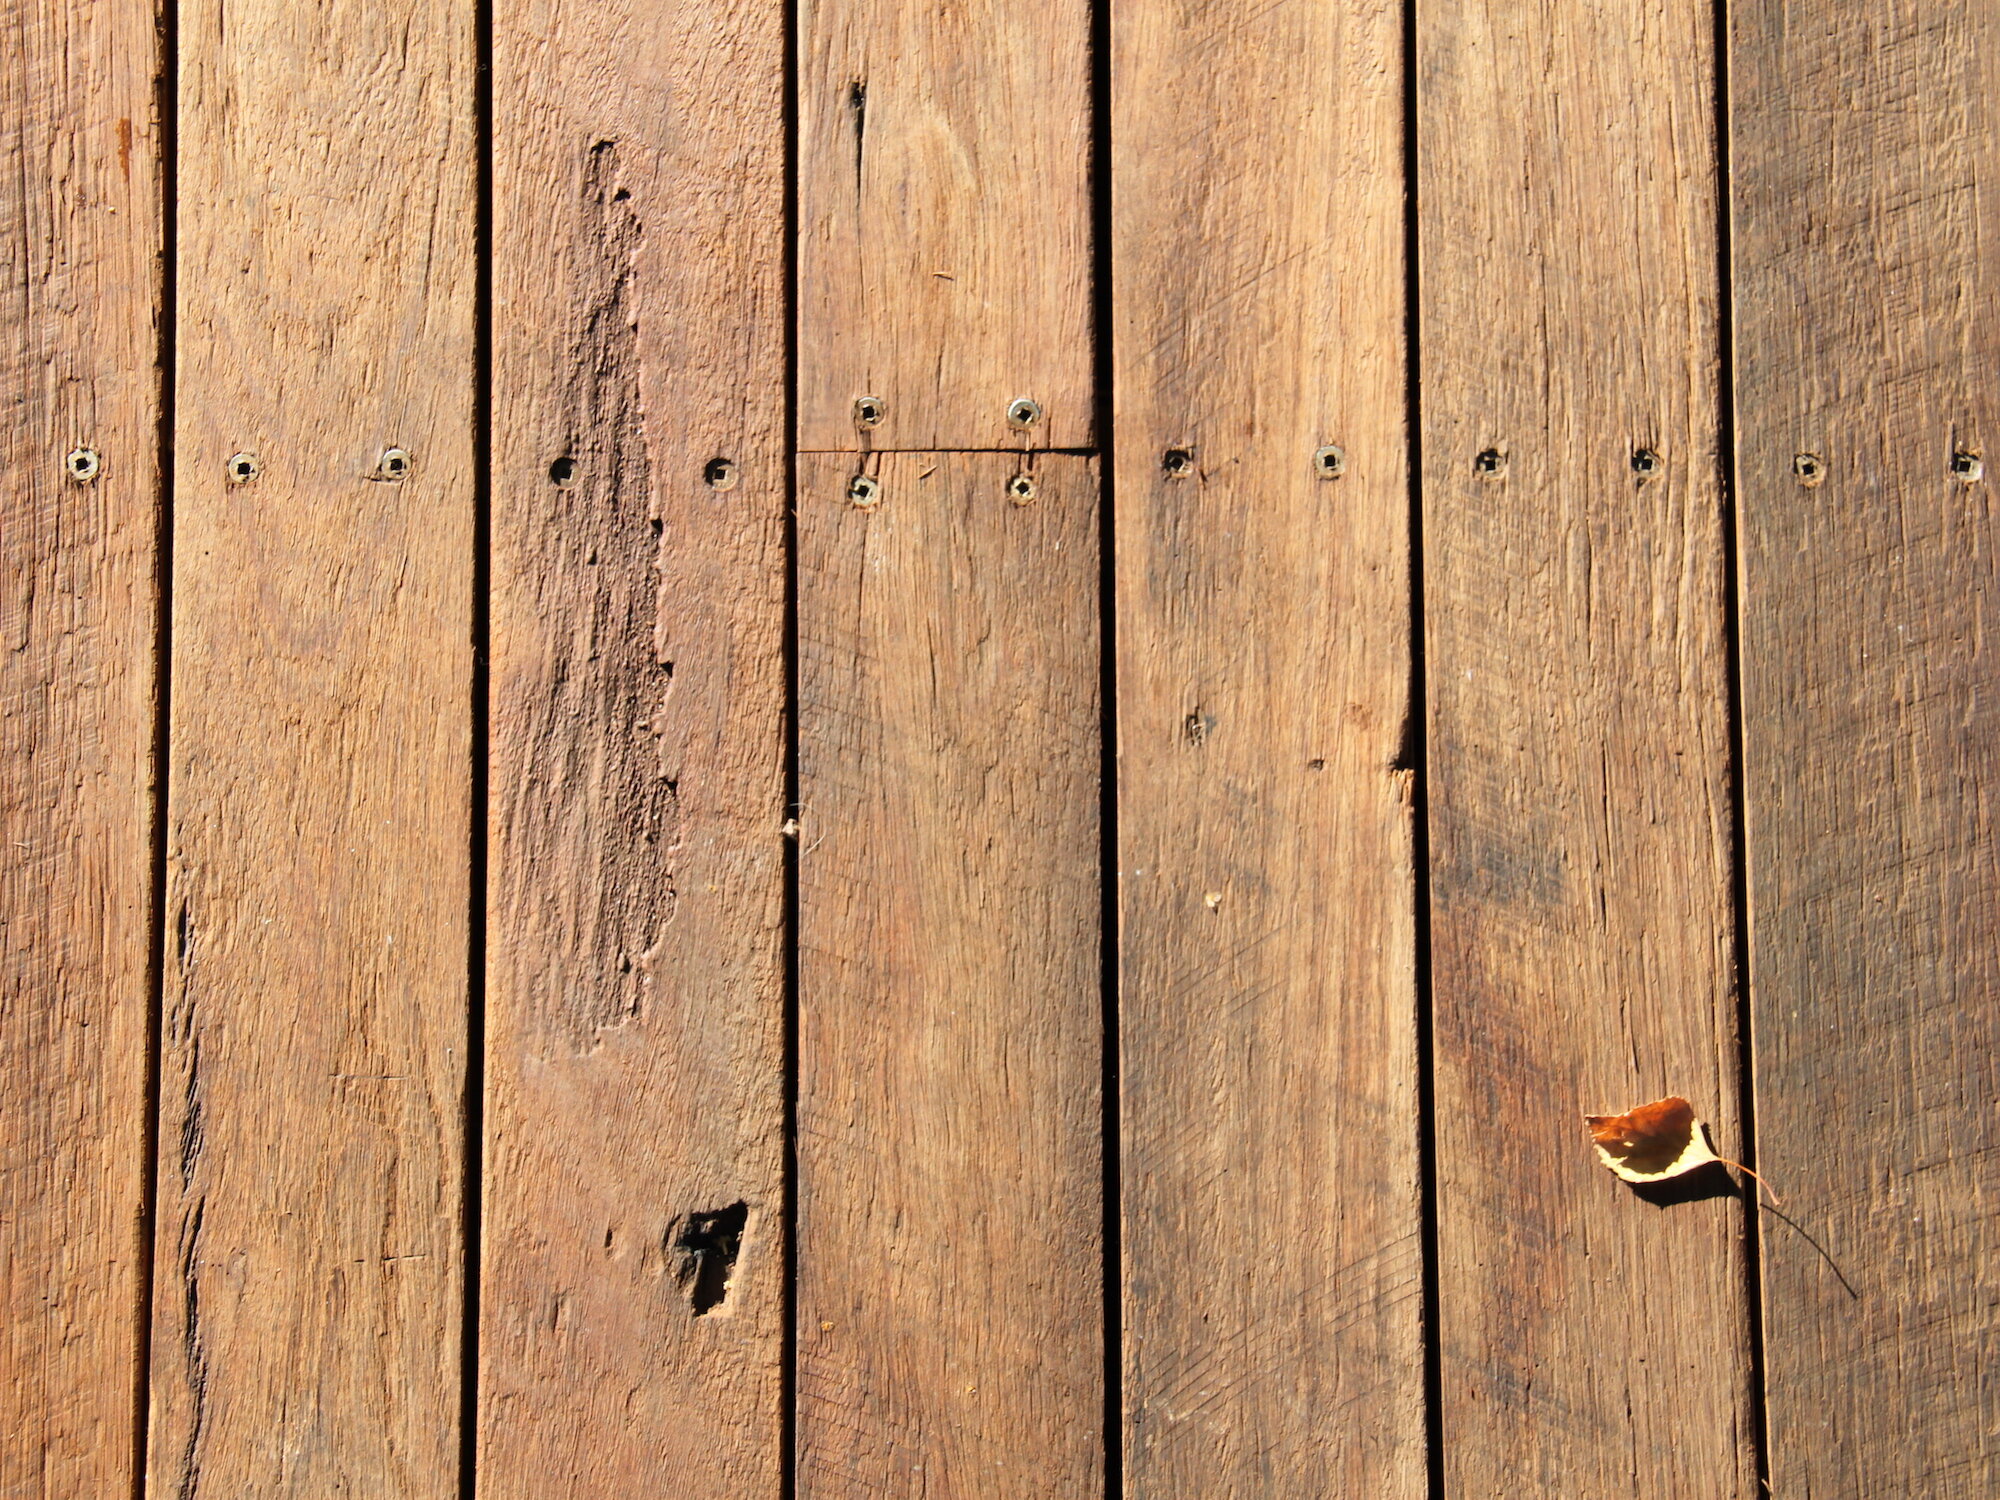 Close up of a recycled timber deck with some dried leaves